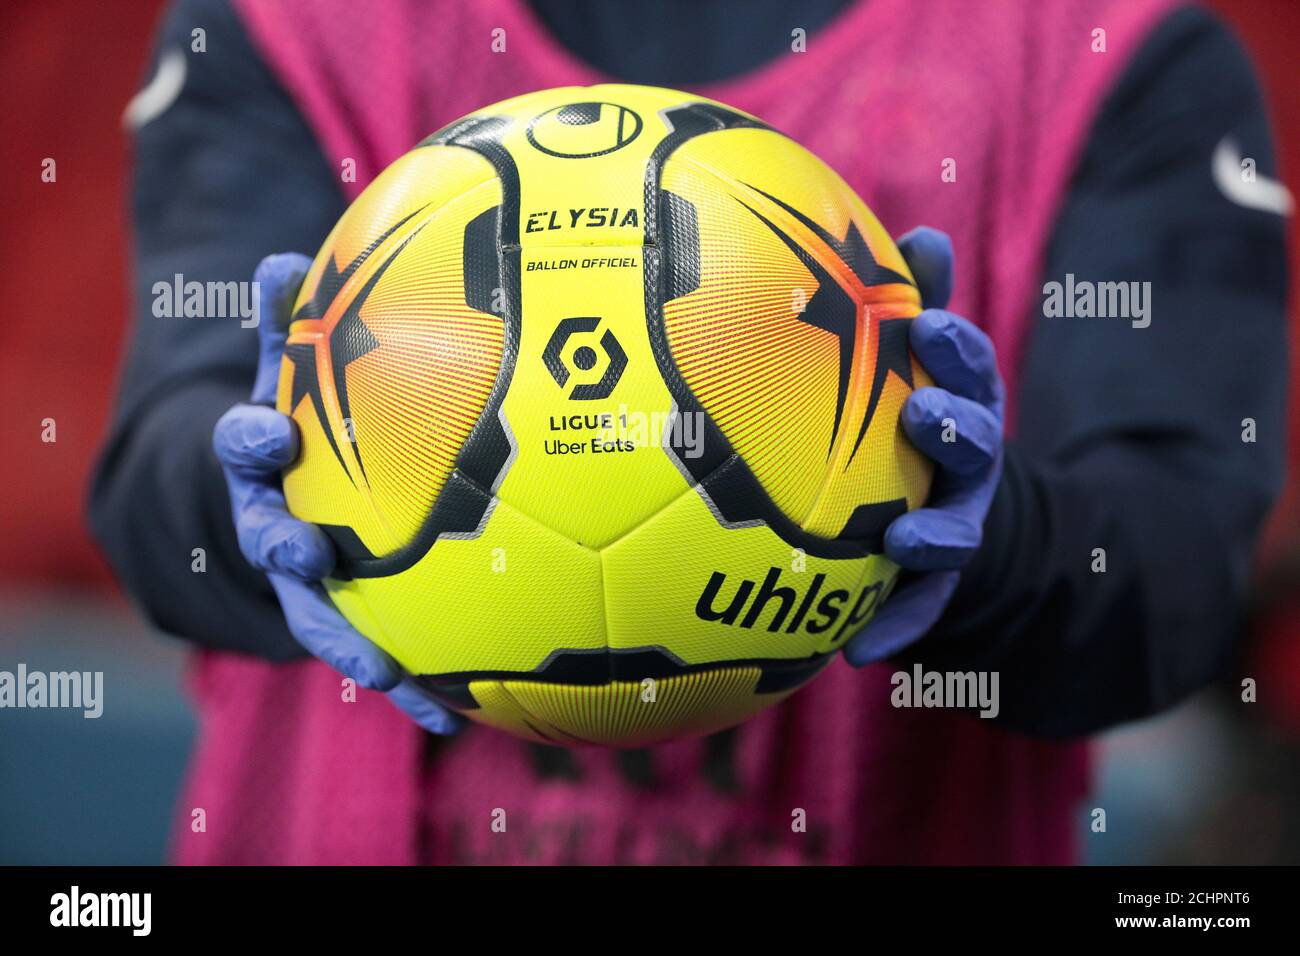 Illustration of the official ball Ligue 1 Uber Eats Elysia by Uhlsport  saison 2020 - 2021 in hand of line out assistant weared with surgical  gloves ag Stock Photo - Alamy